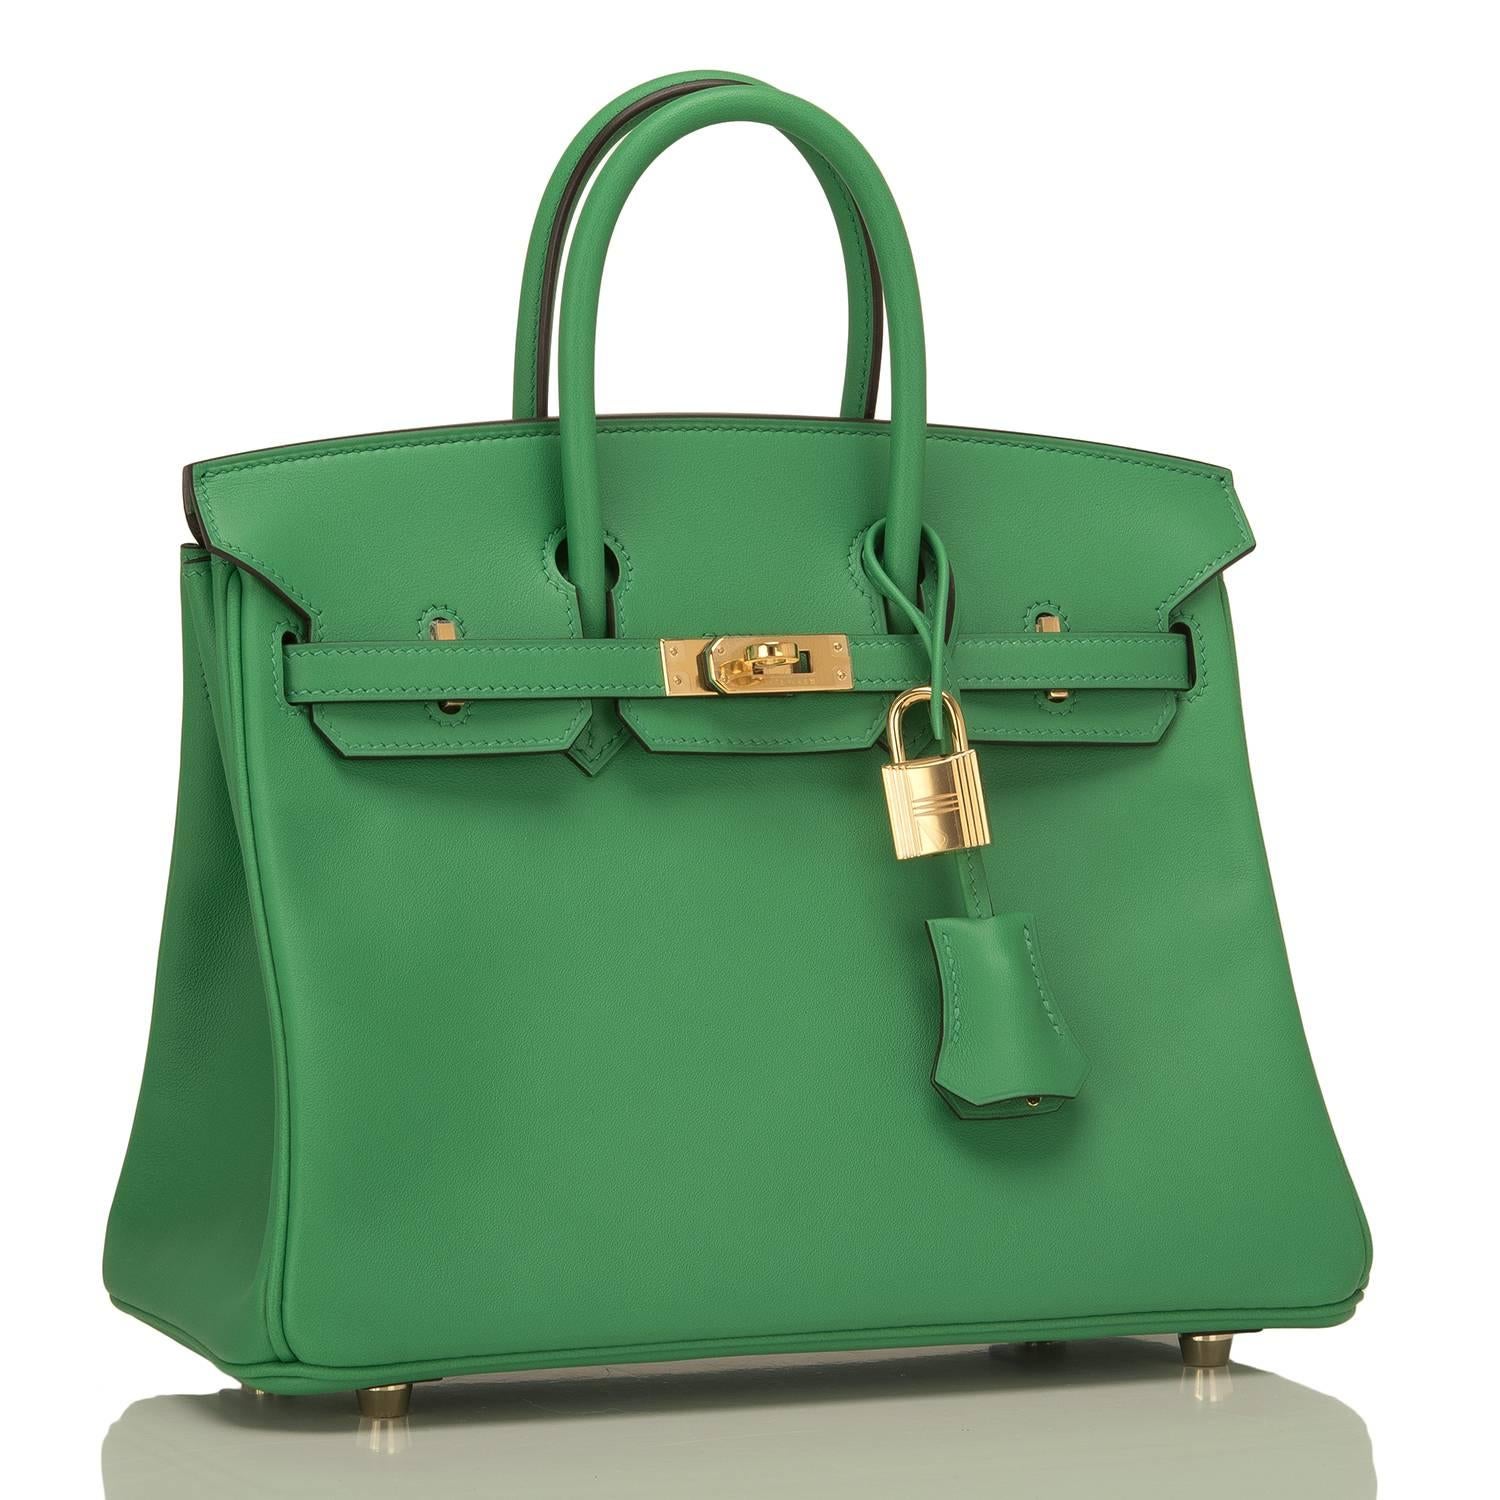 Hermes Bamboo Birkin 25cm in swift leather with gold hardware.

This style features tonal stitching, front toggle closure, clochette with lock and two keys, and double rolled handles.

The interior is lined in Bamboo chevre with one zip pocket